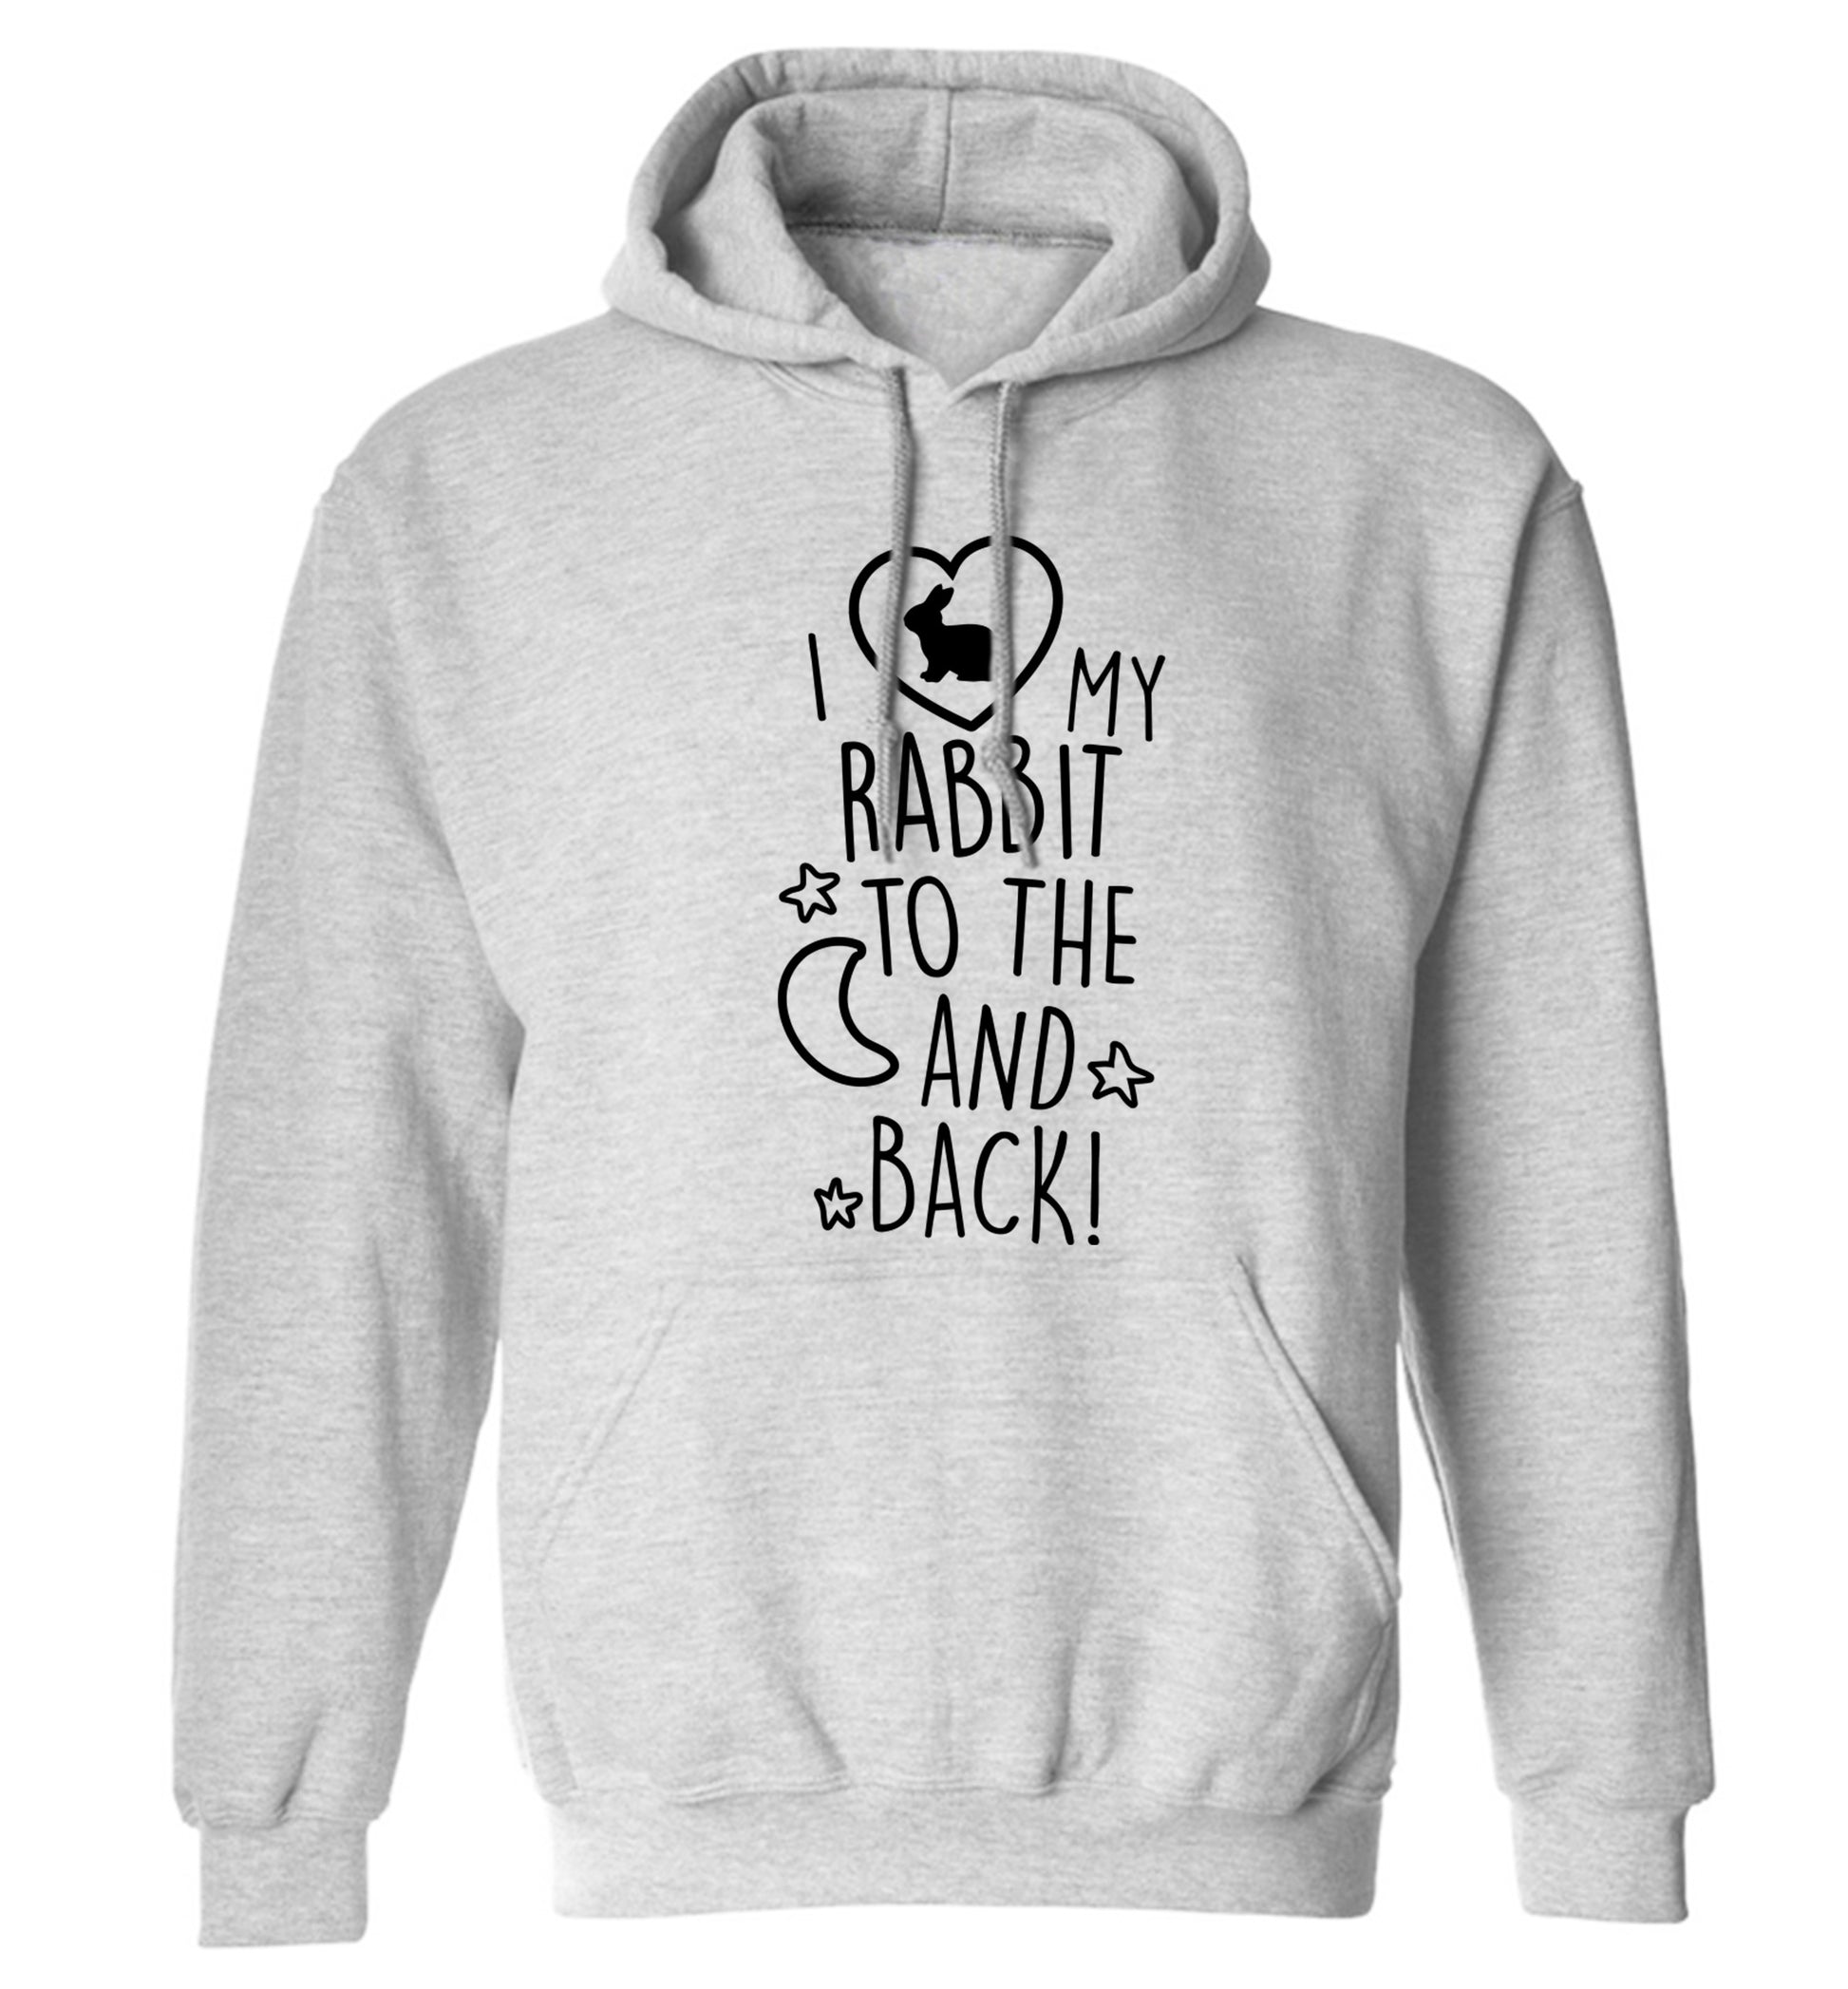 I love my rabbit to the moon and back adults unisex grey hoodie 2XL